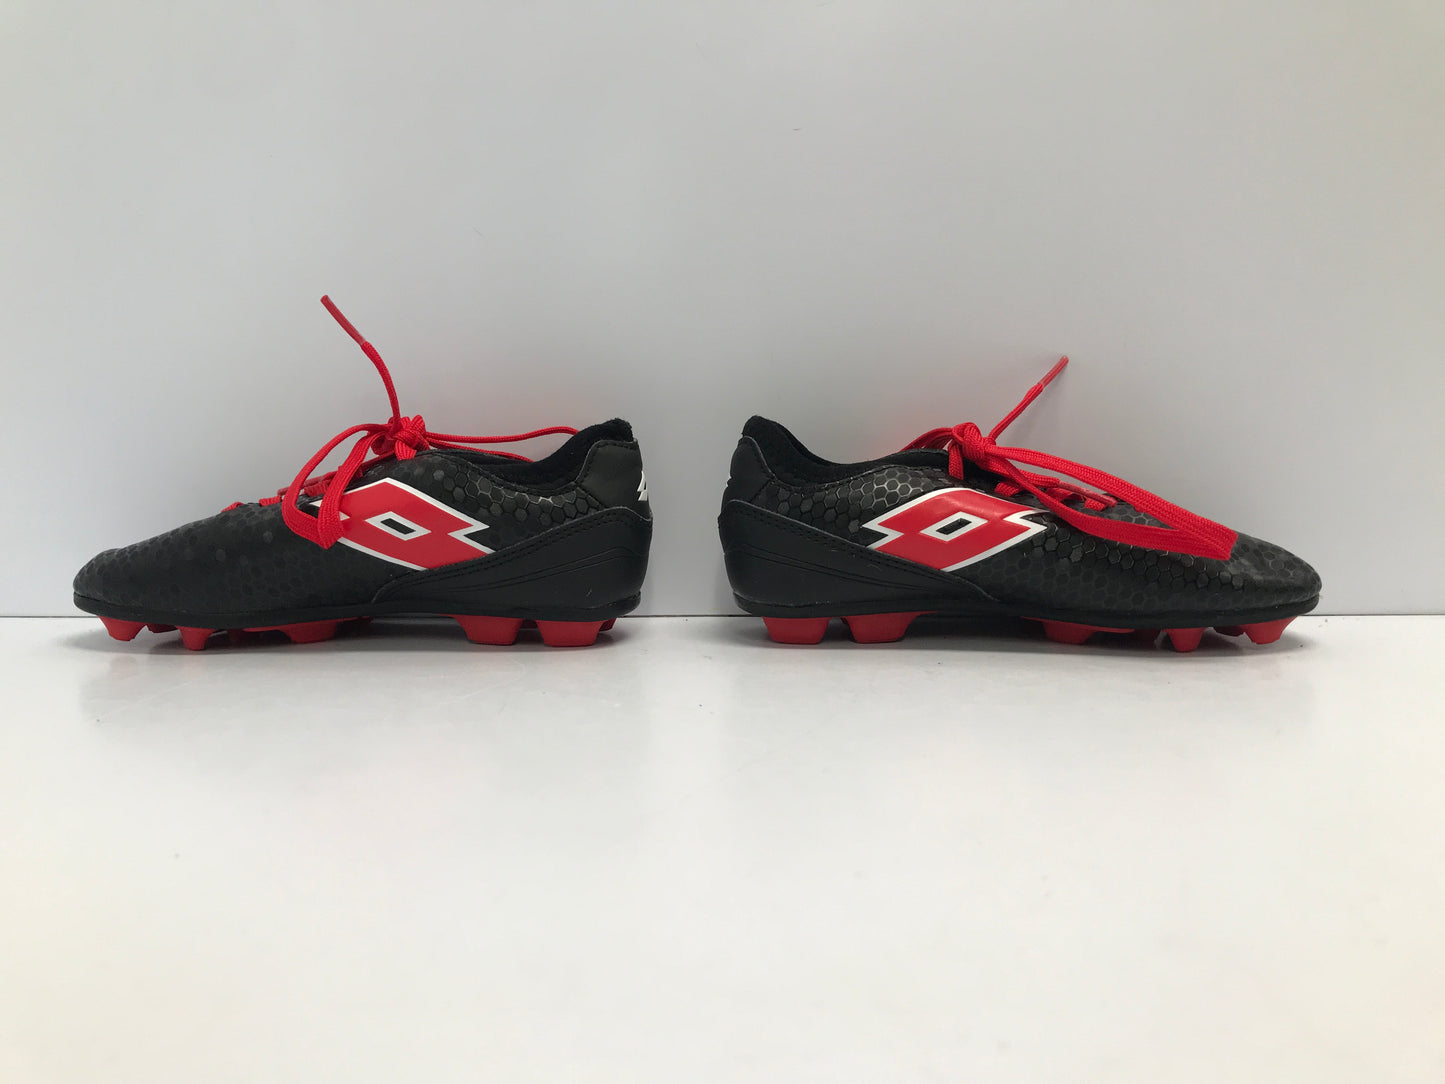 Soccer Shoes Cleats Child Size 13 Lotto Black Red Like New